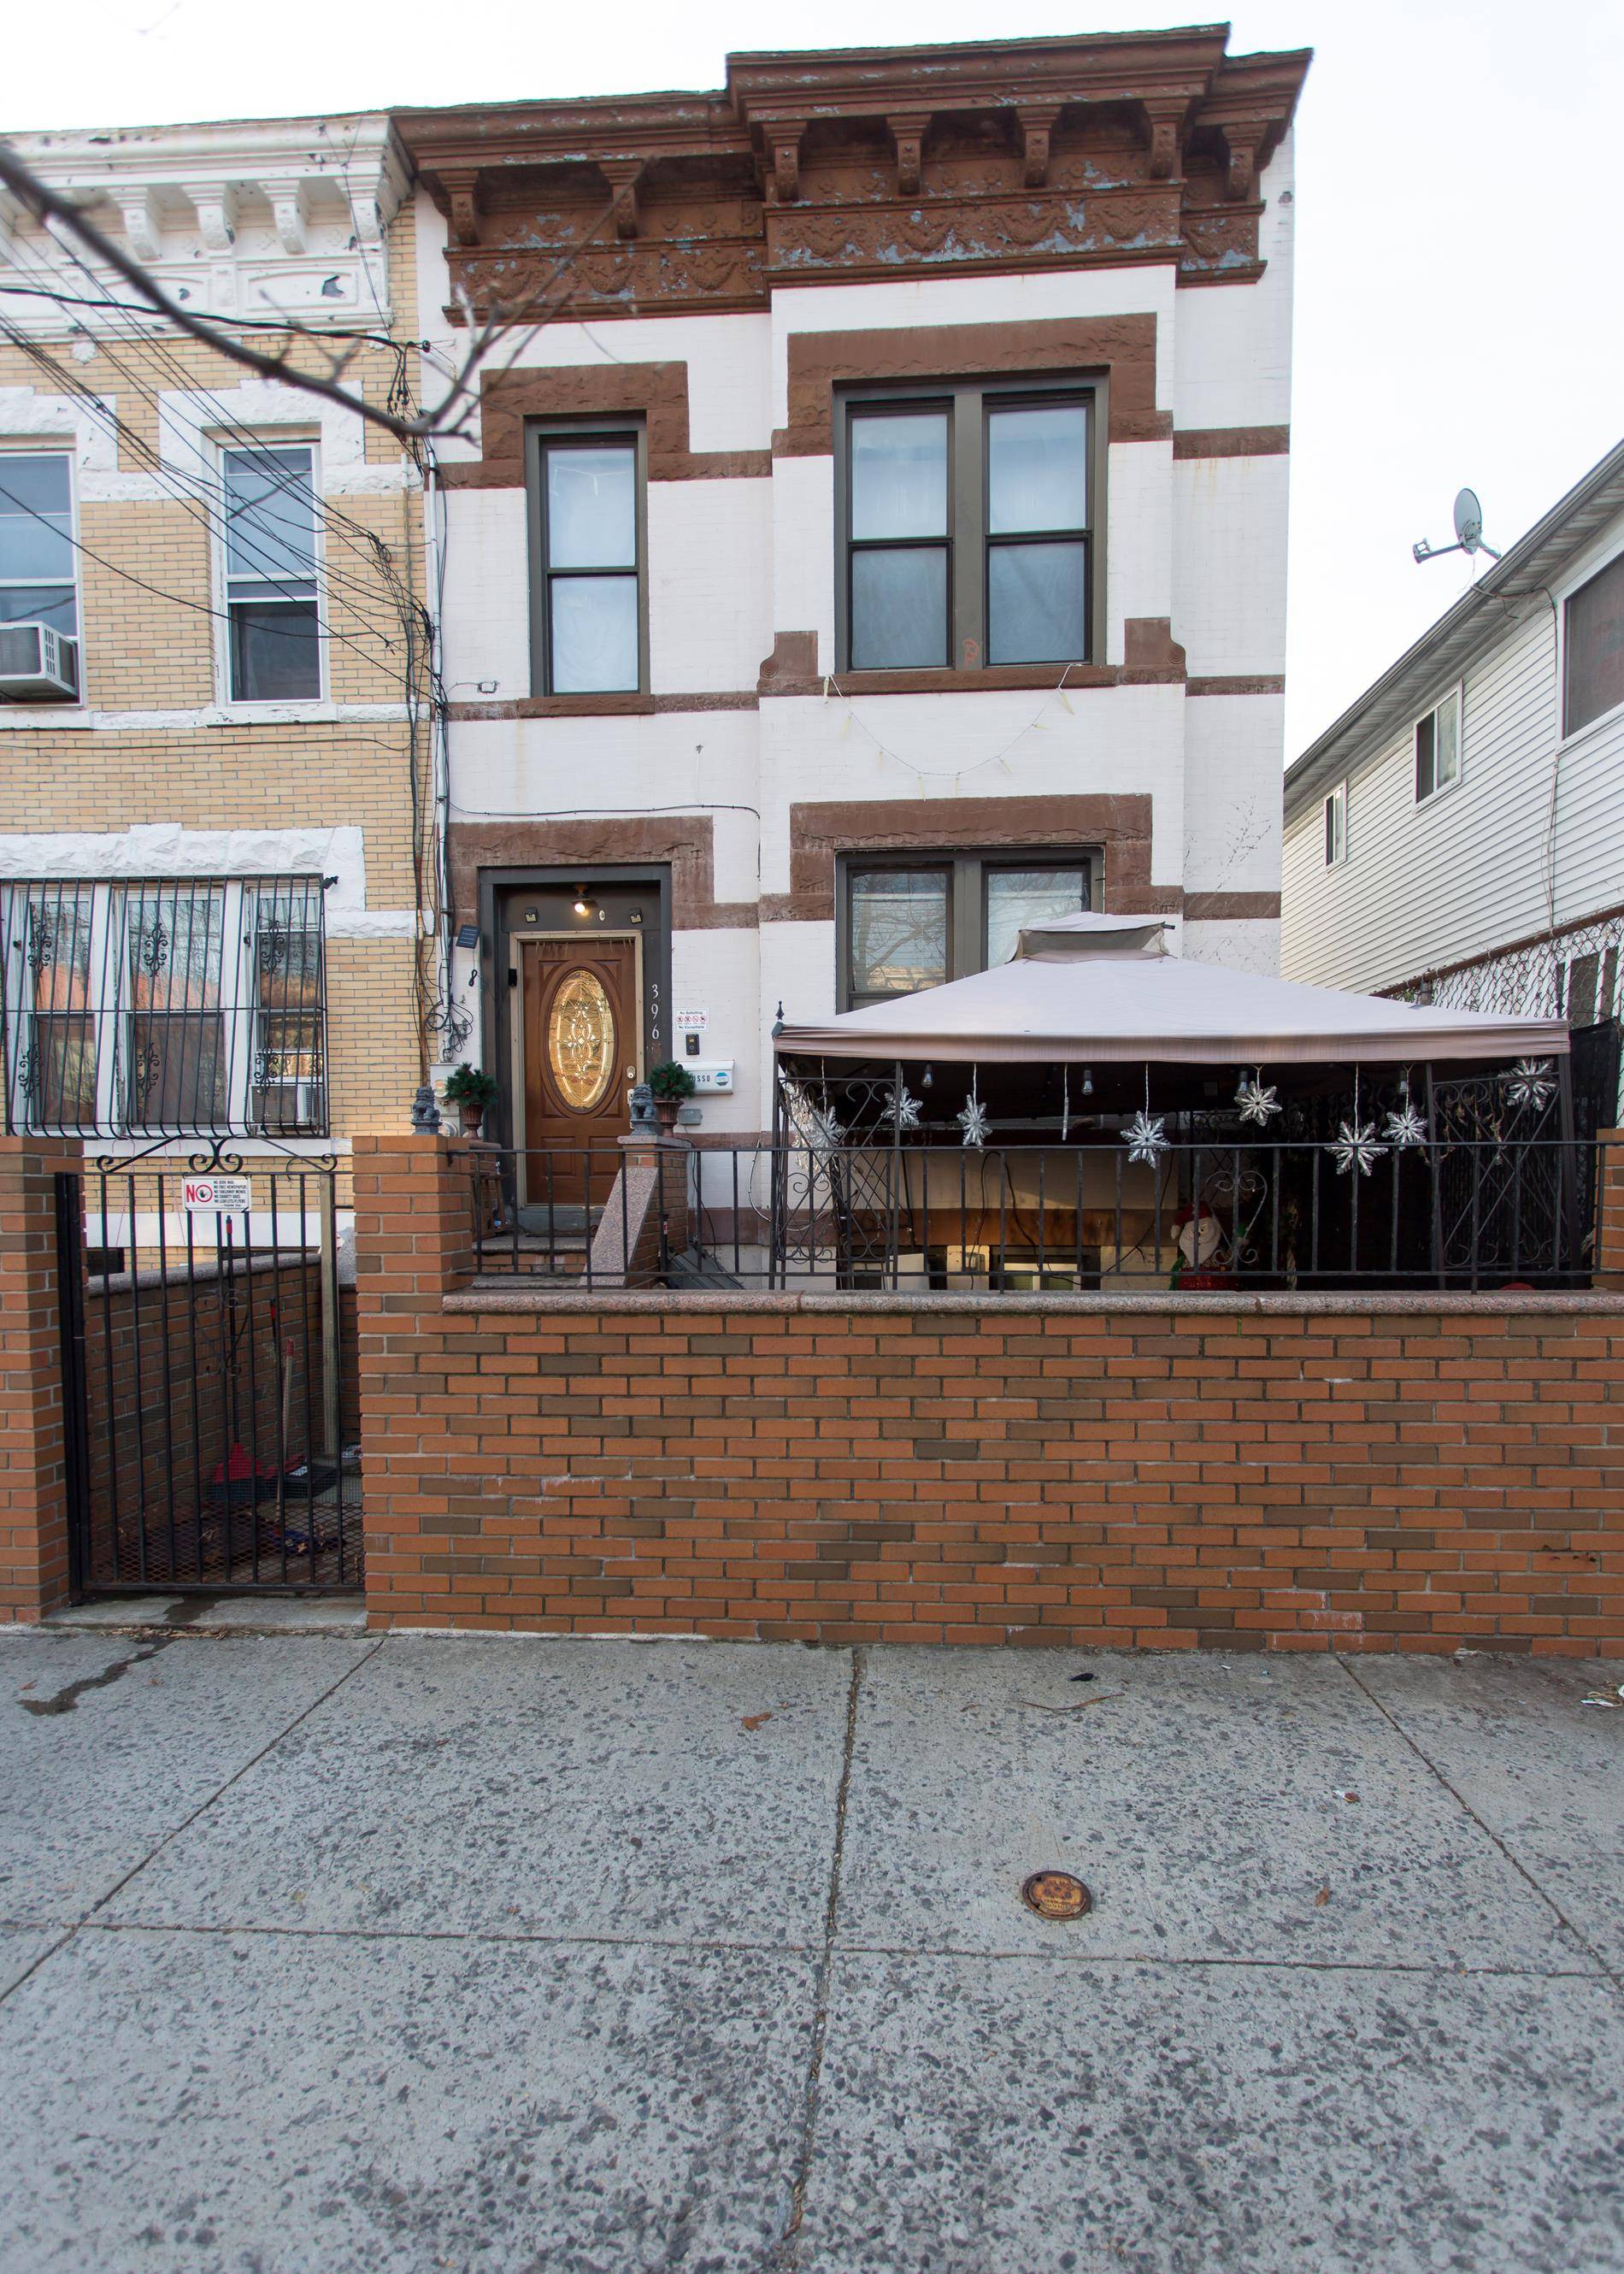 Opportunity awaits ! This is a legal 2 family home with a bonus apartment in the basement that has it's own entrance.